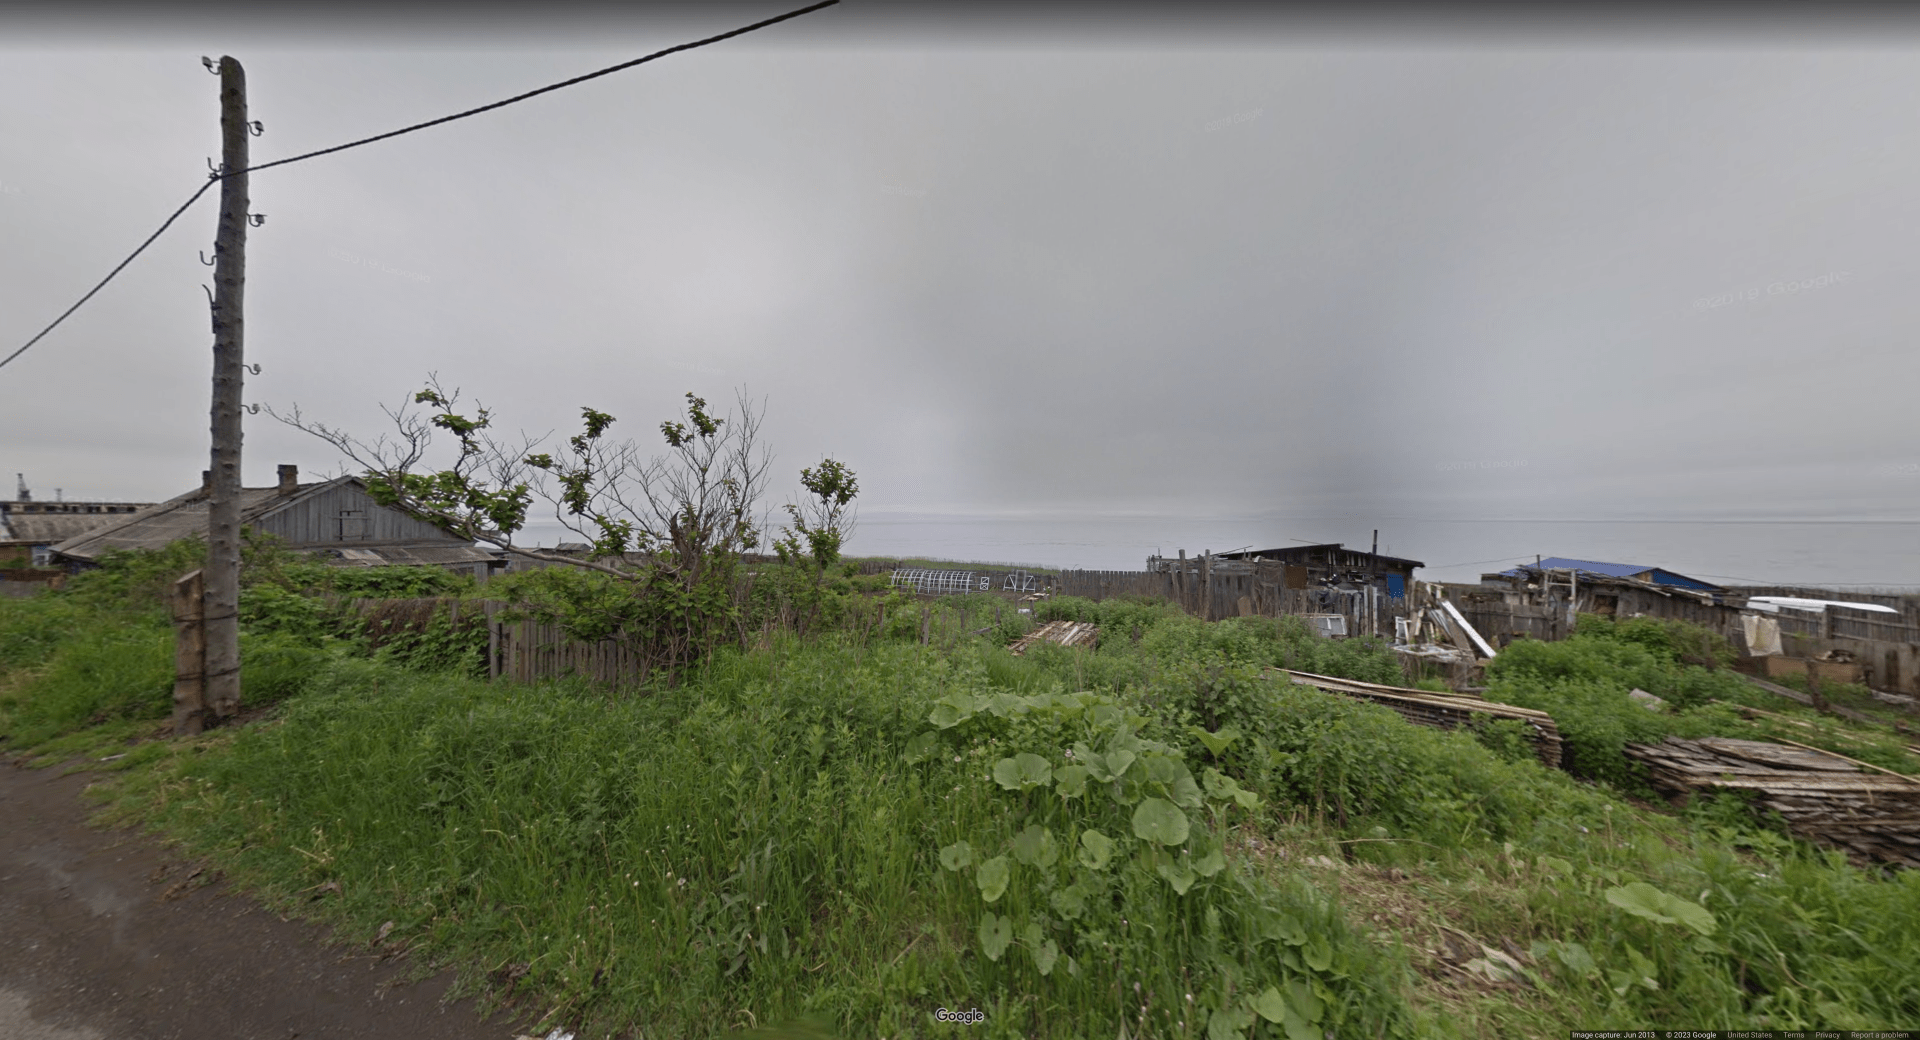 Image of dilapidated sheds and fences next to an ocean, with overcast skies